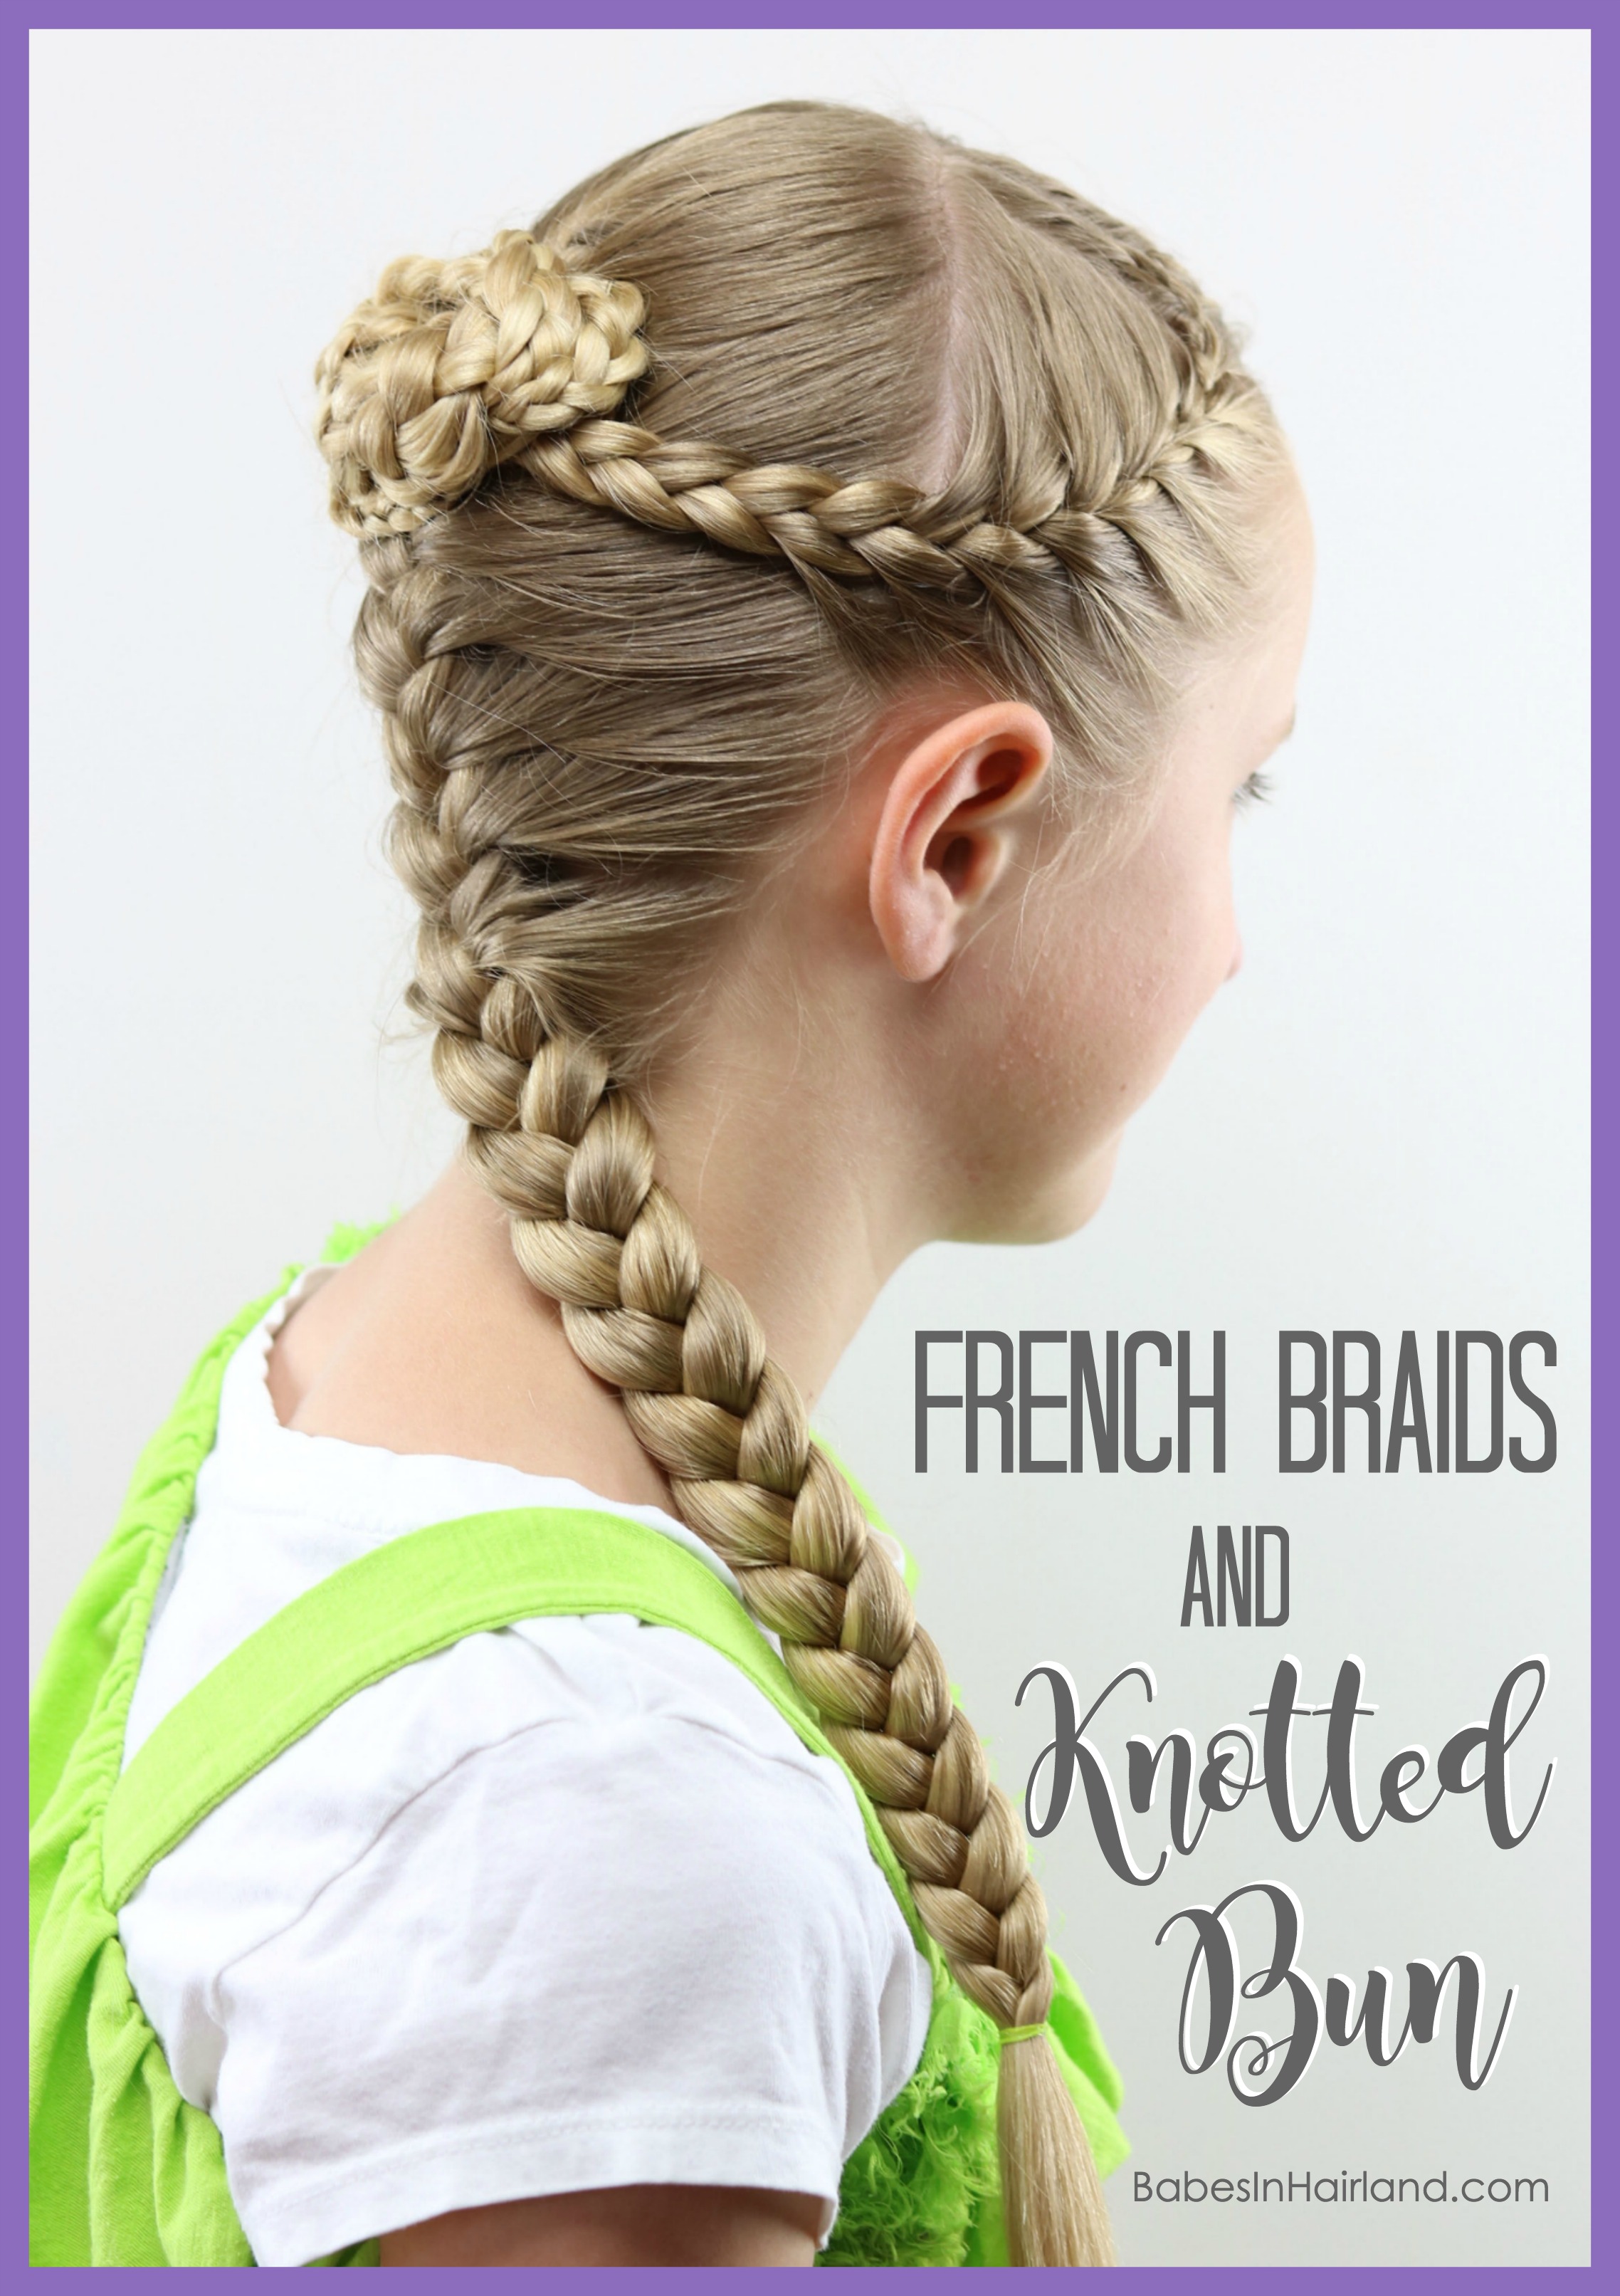 French Braids and Knotted Bun | A Hairstyle for Every Season